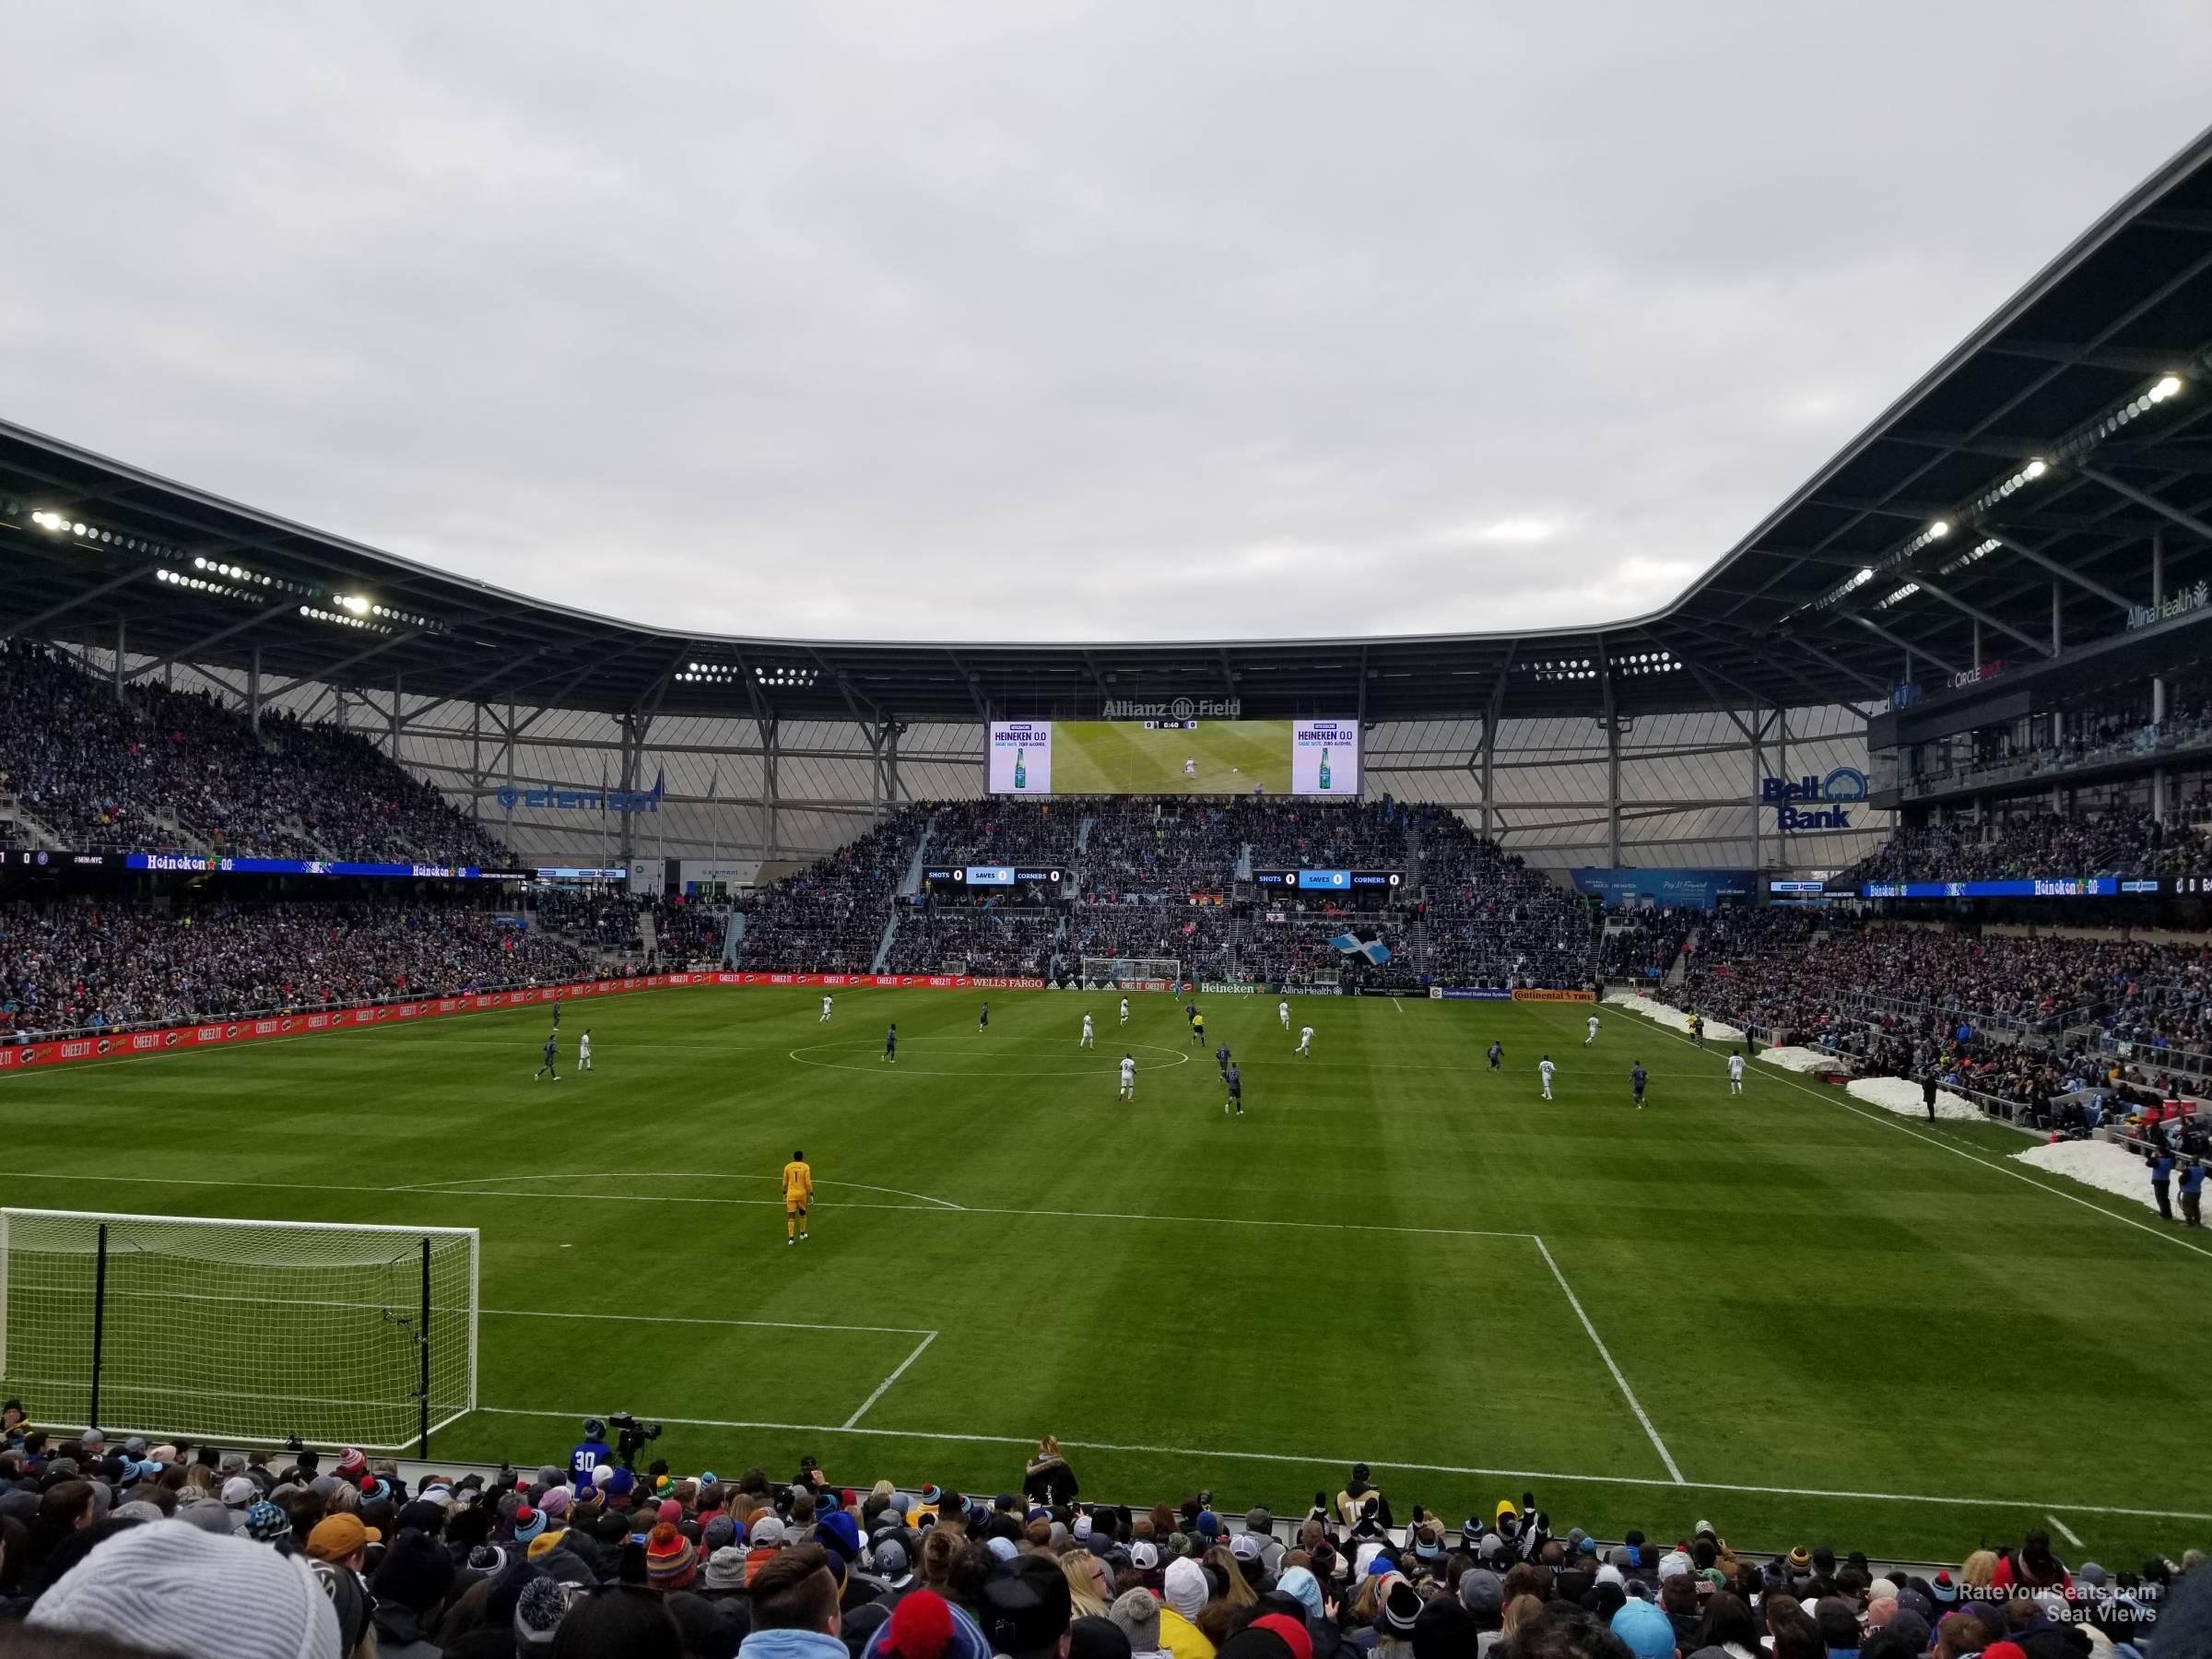 section 2, row 20 seat view  - allianz field